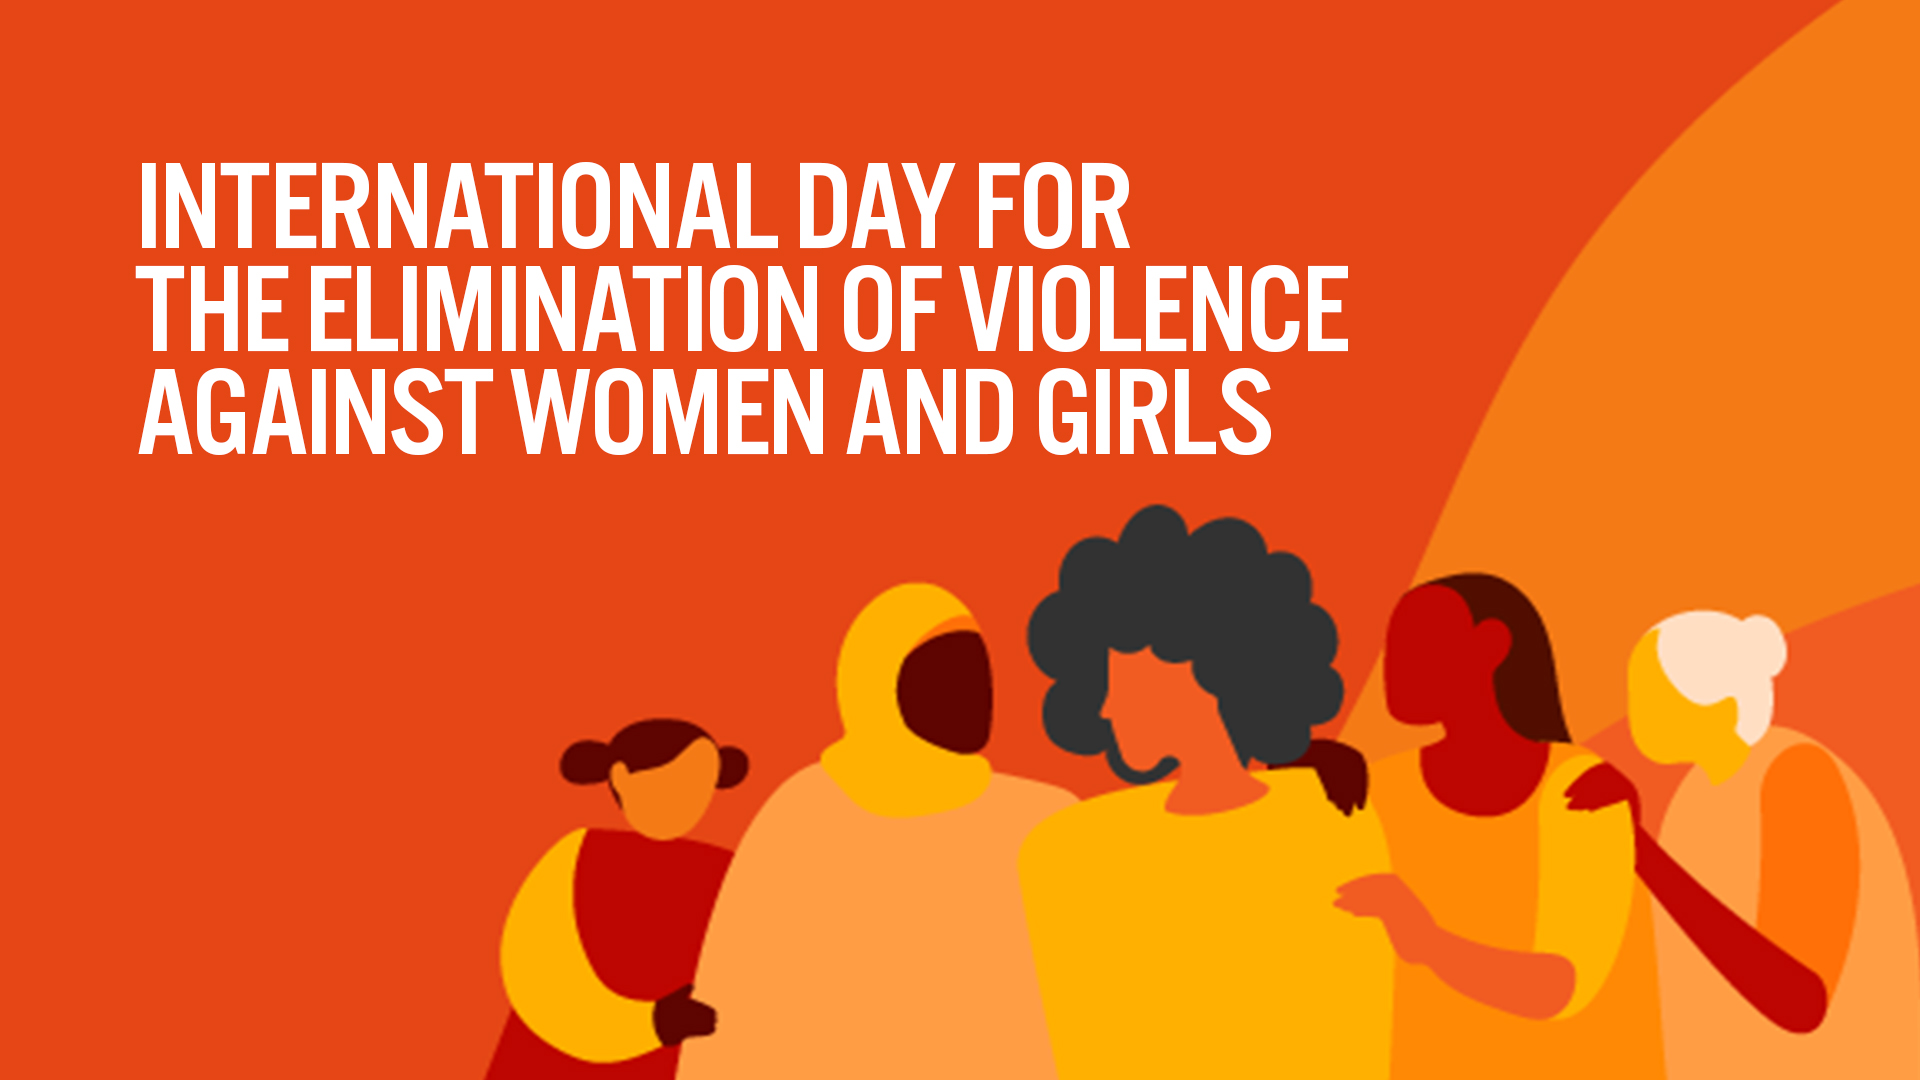 International Day for the Elimination of Violence Against Women and Girls